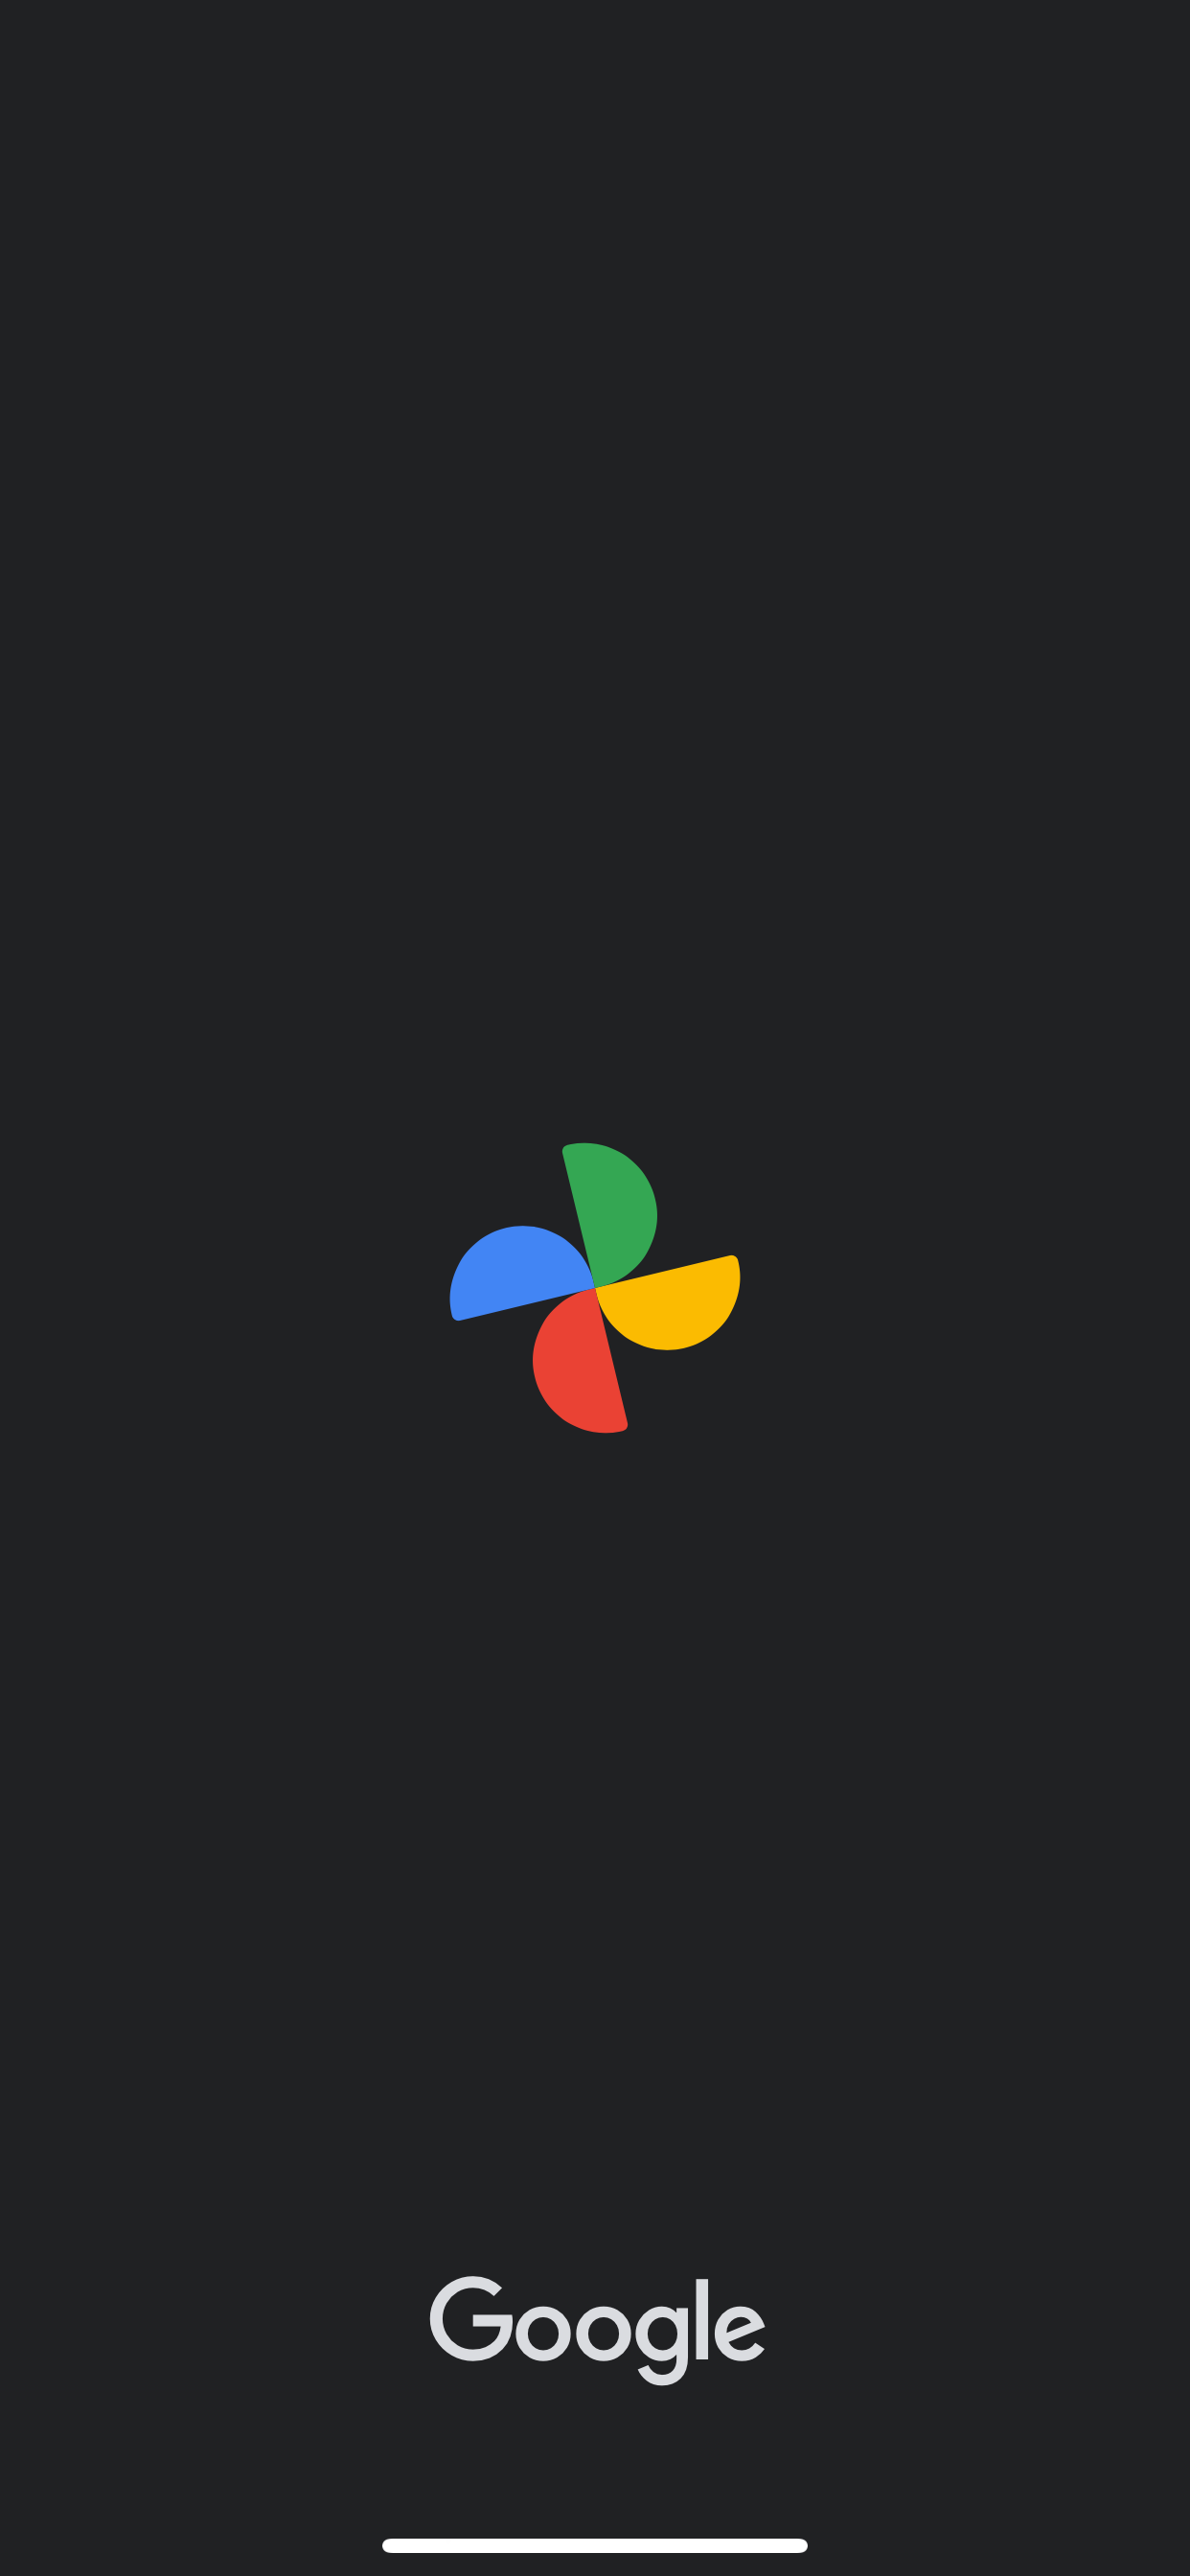 The splash screen for the Google Photos app which just shows the logo spinning.